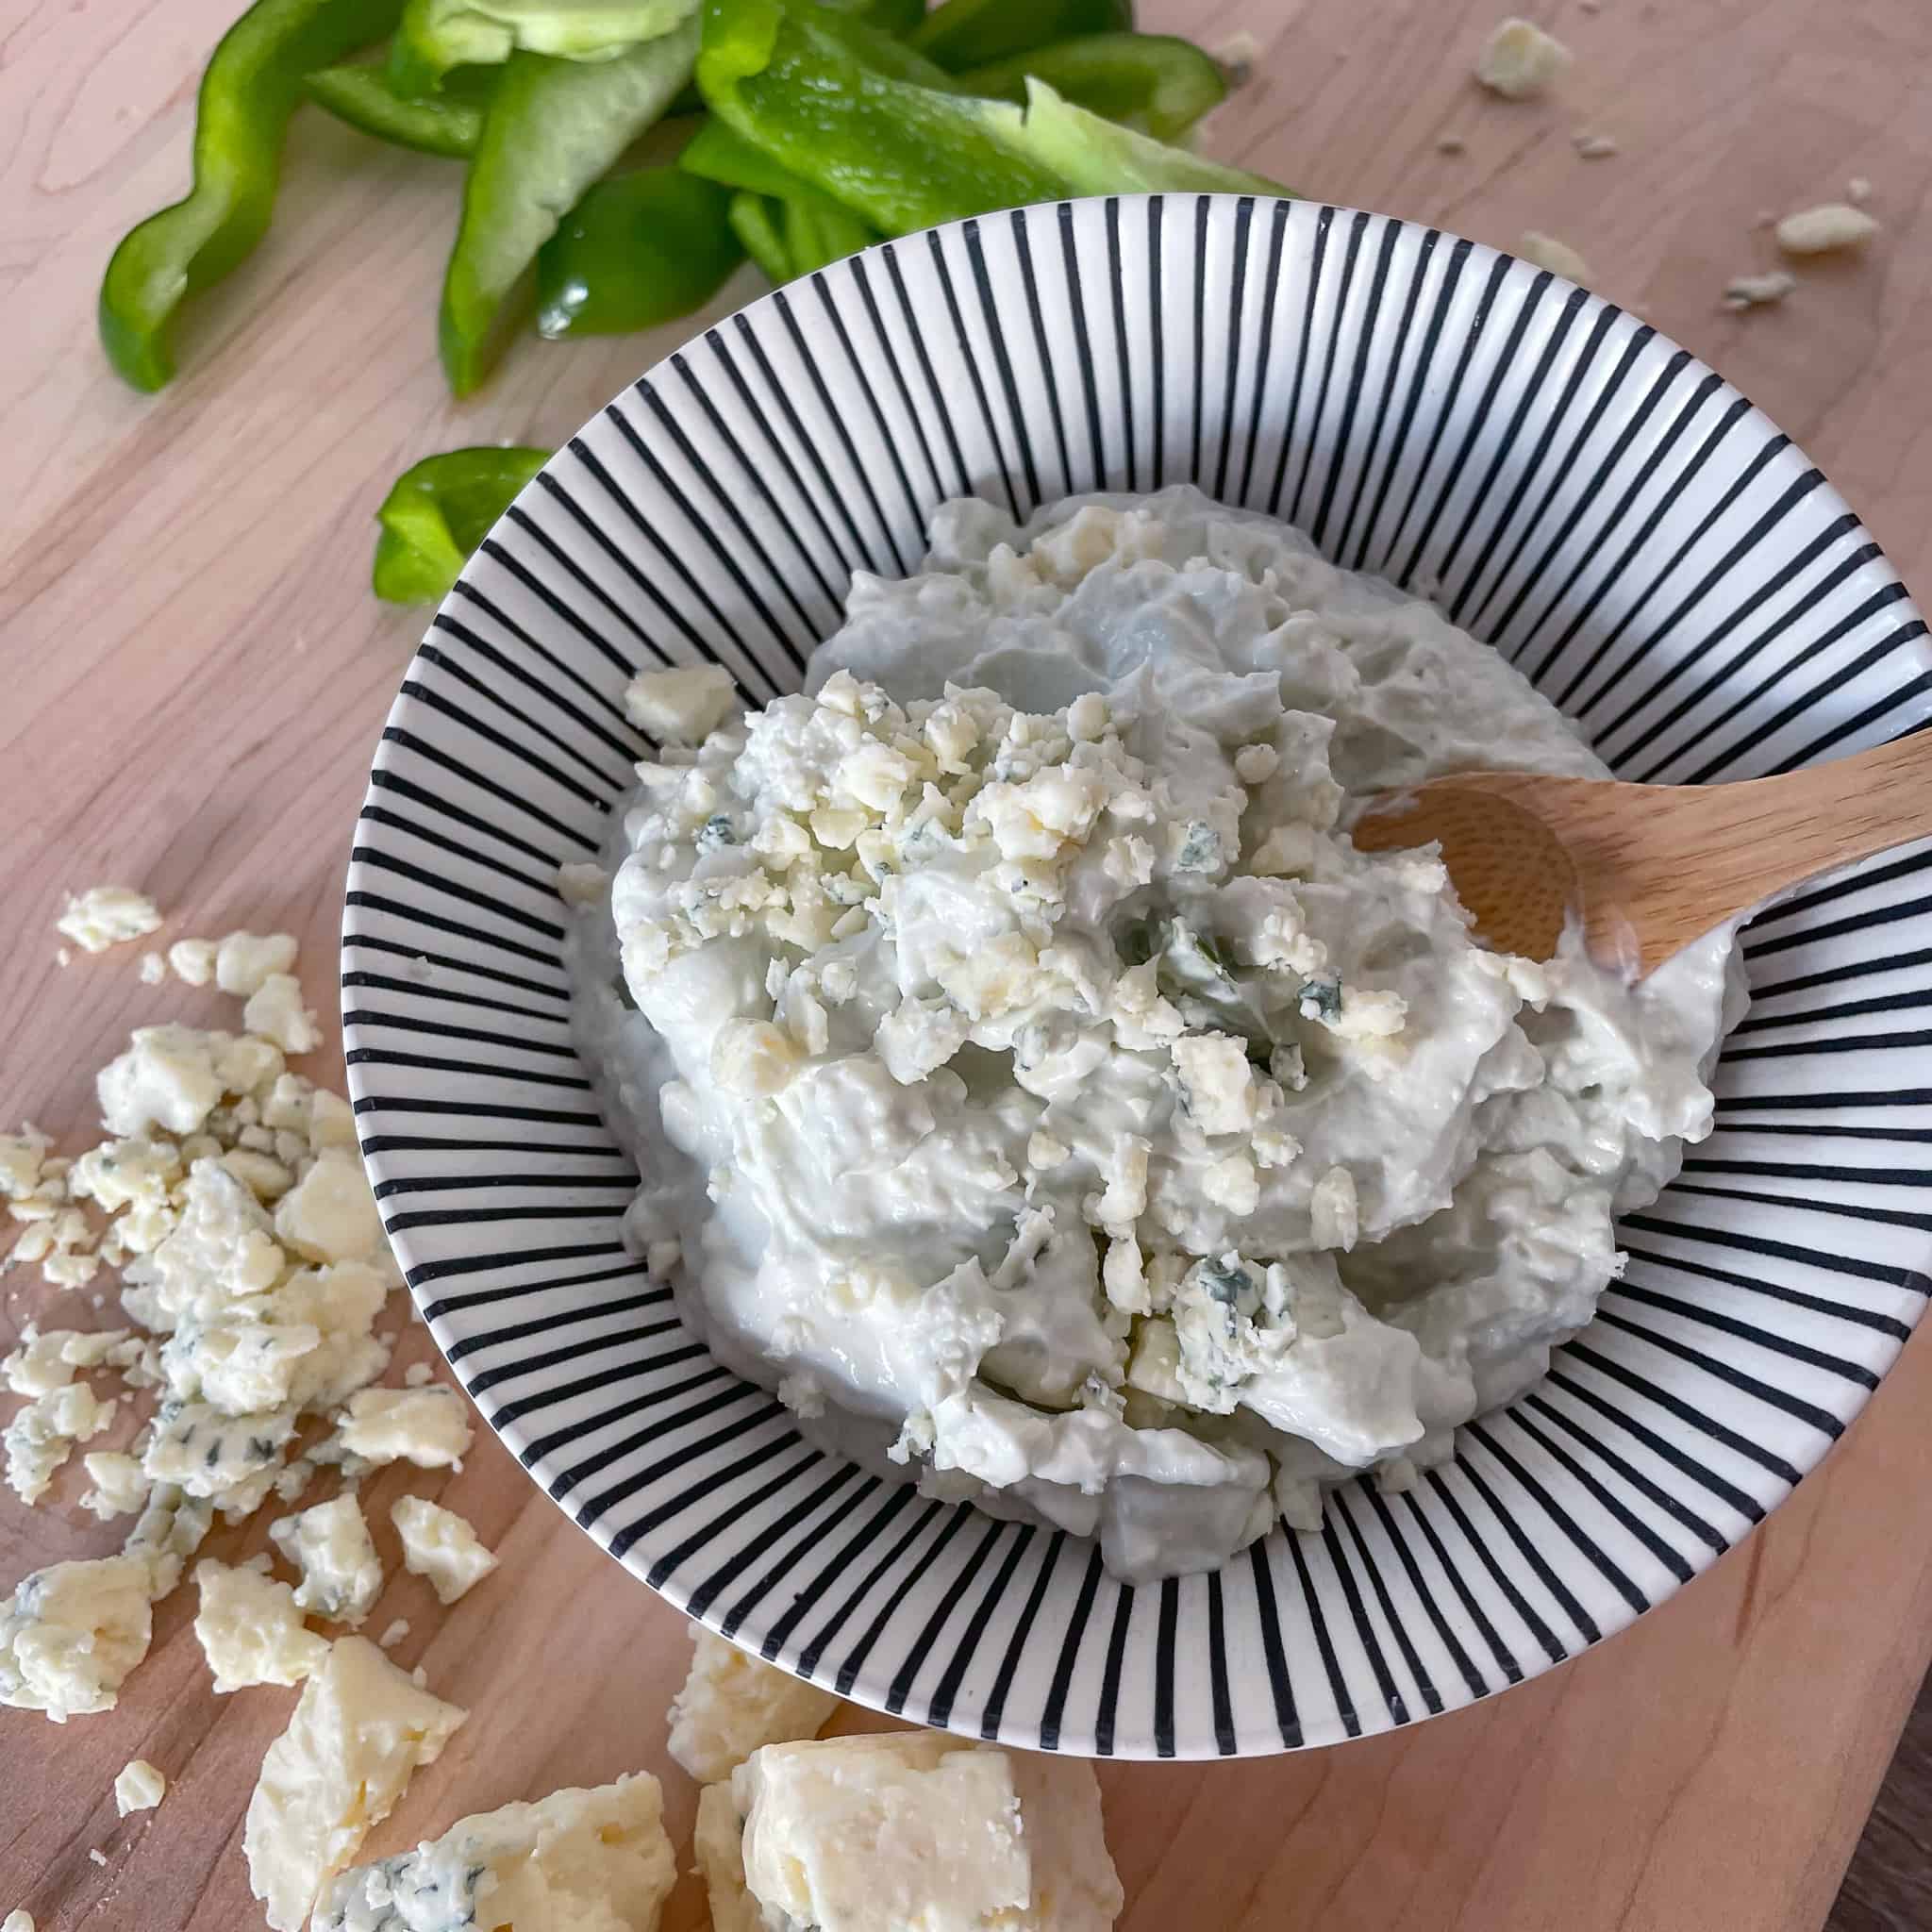 Chunky Blue Cheese Dressing